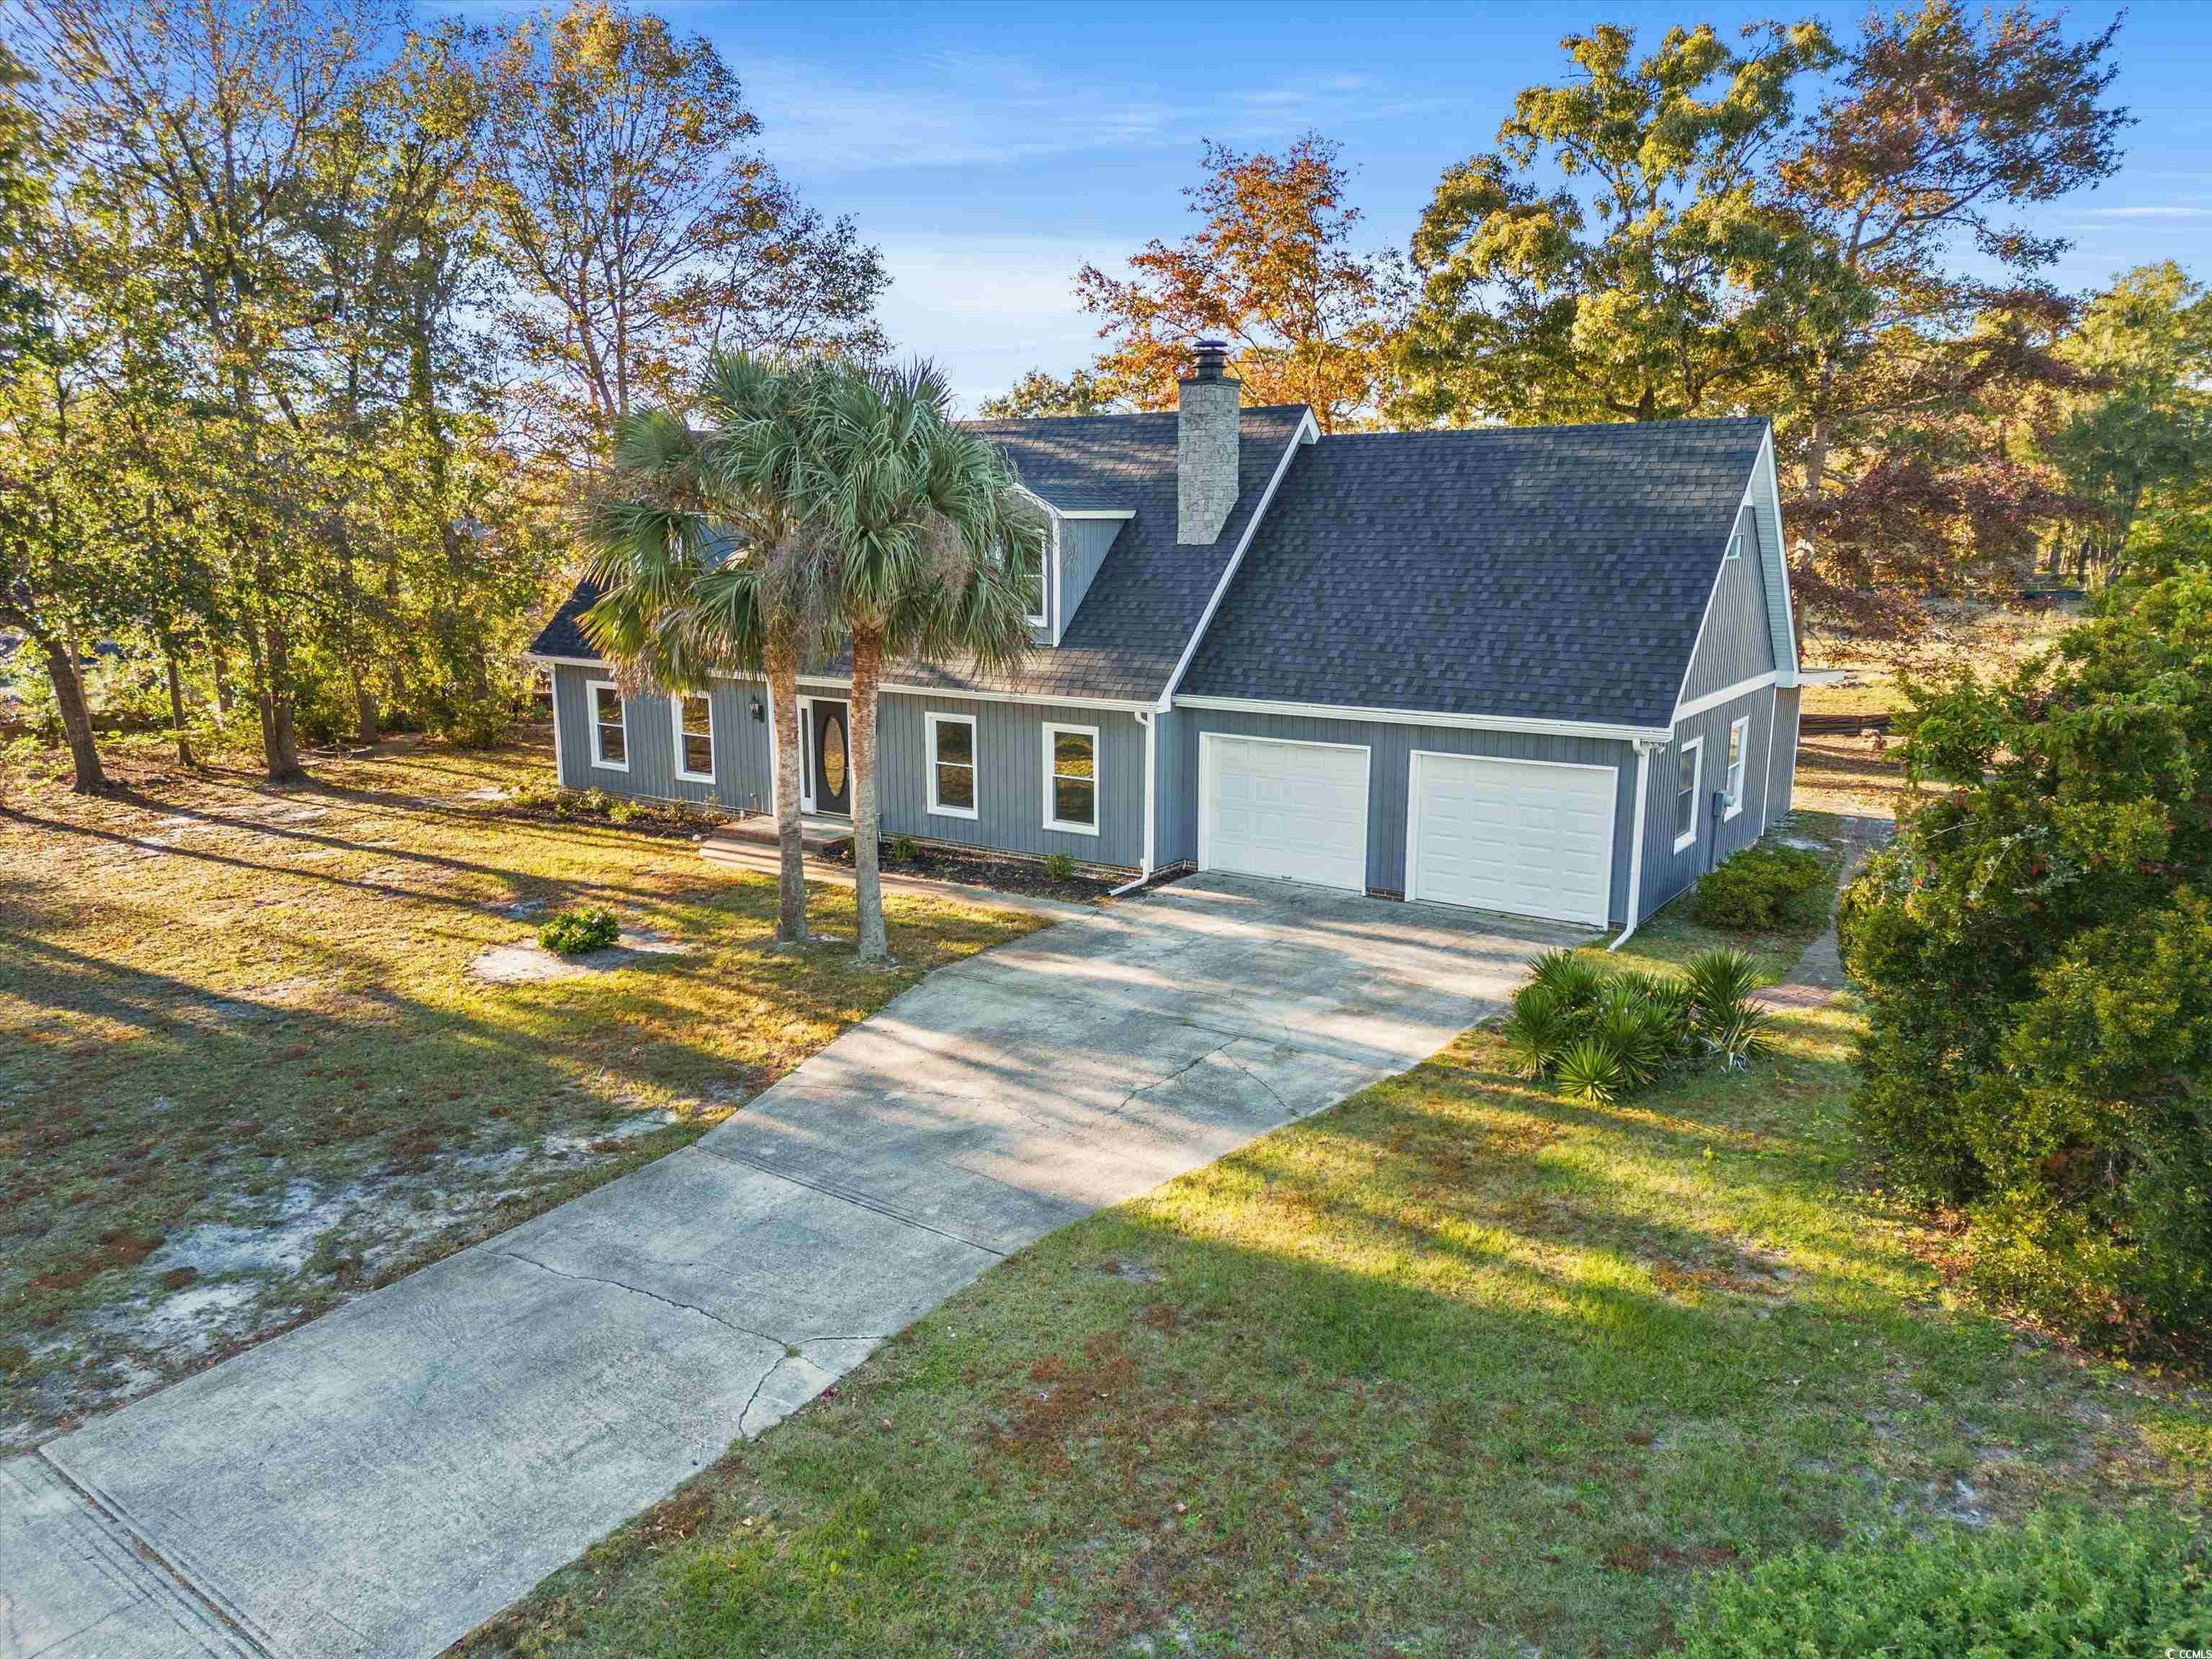 1350 Crooked Pine Dr. Surfside Beach, SC 29575